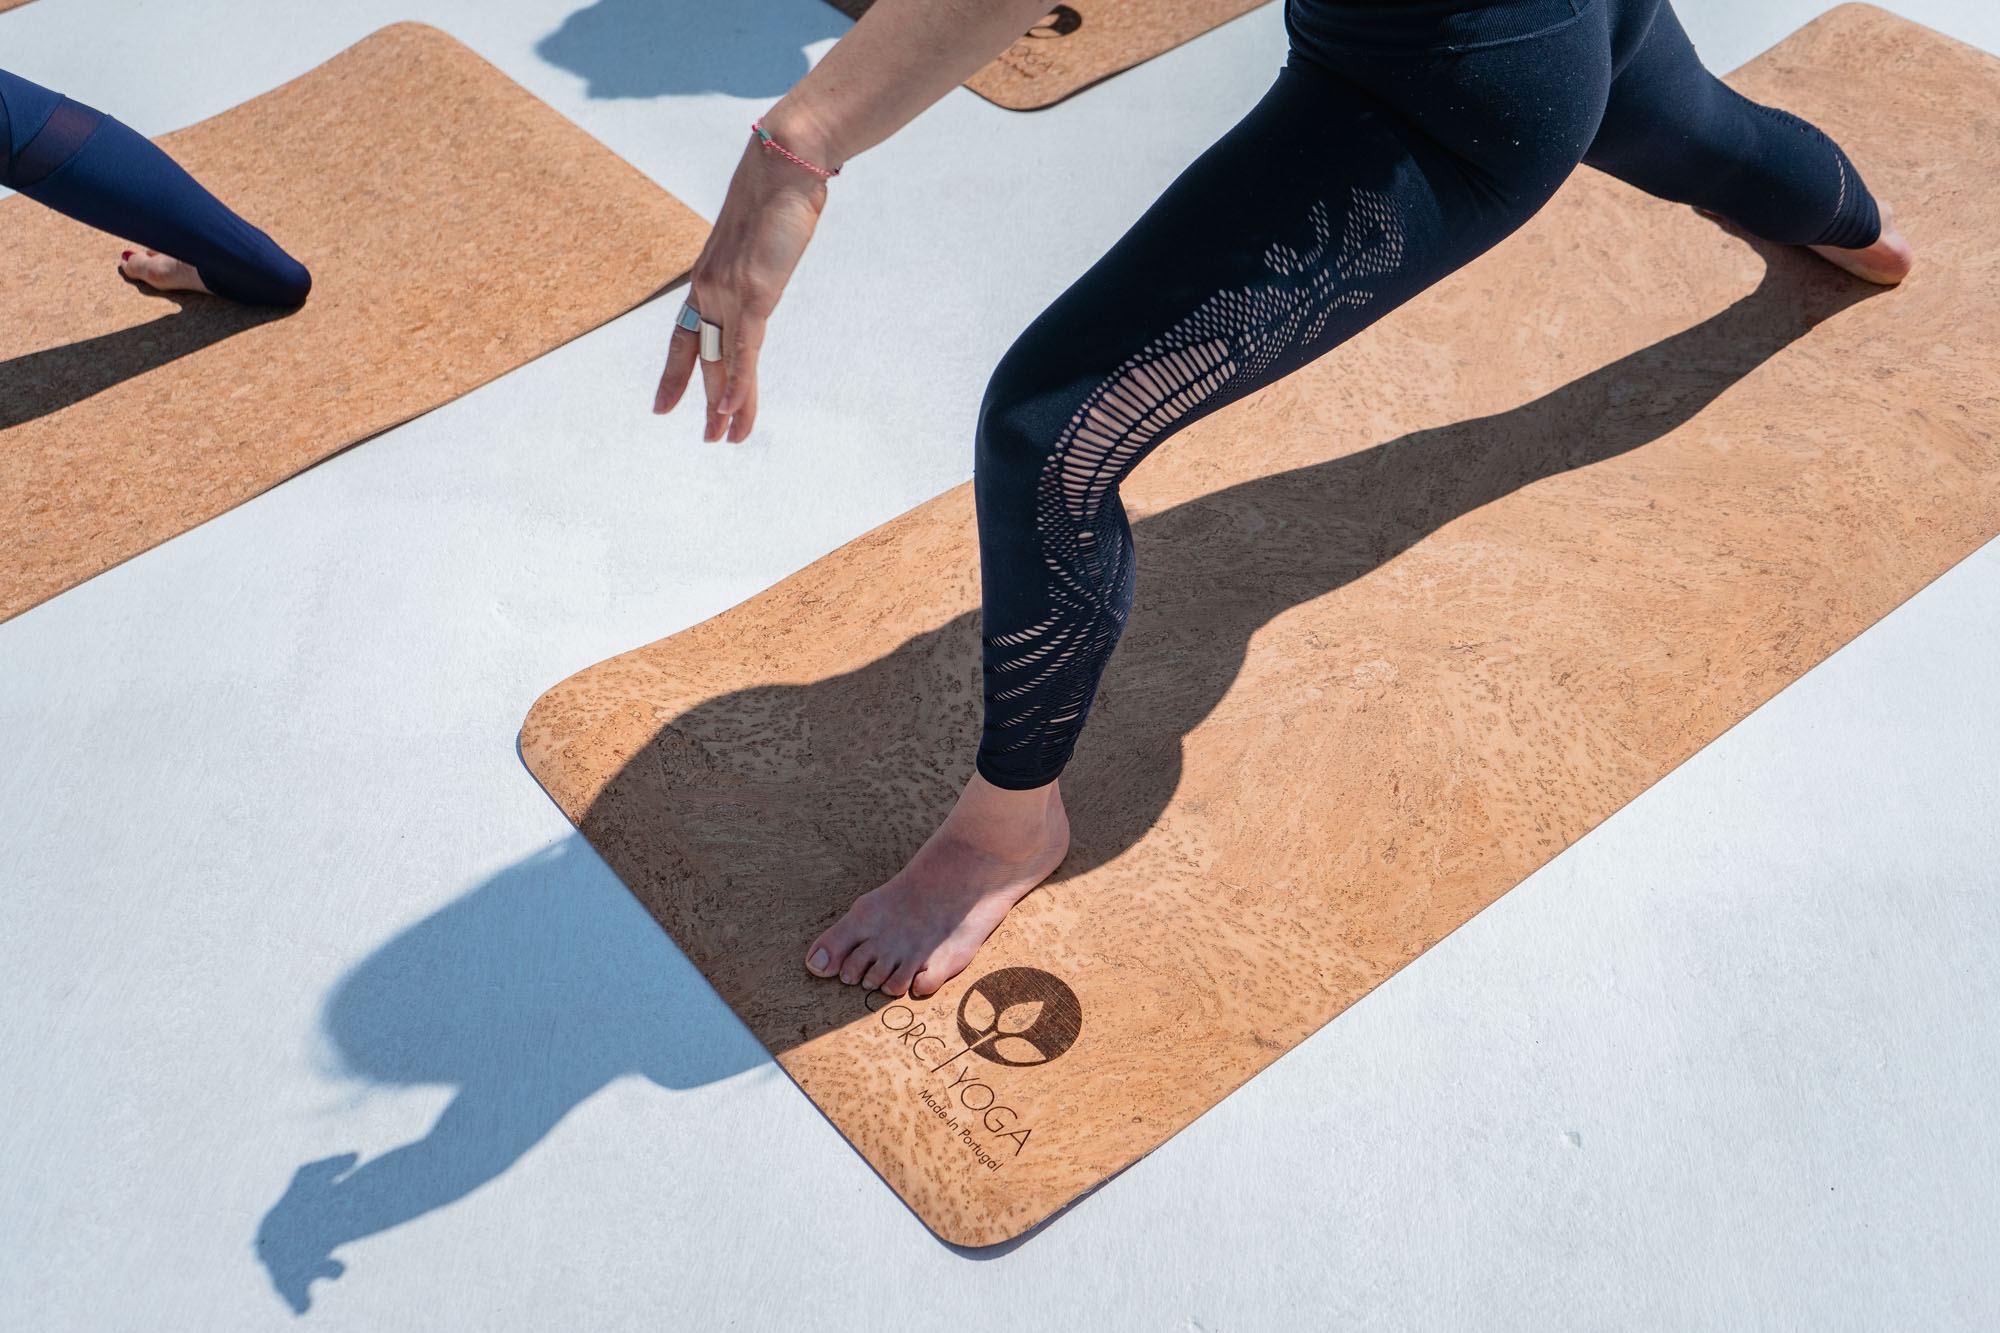 5 Reasons Why Cork Yoga Mats and Blocks Are Best For Hot Yoga